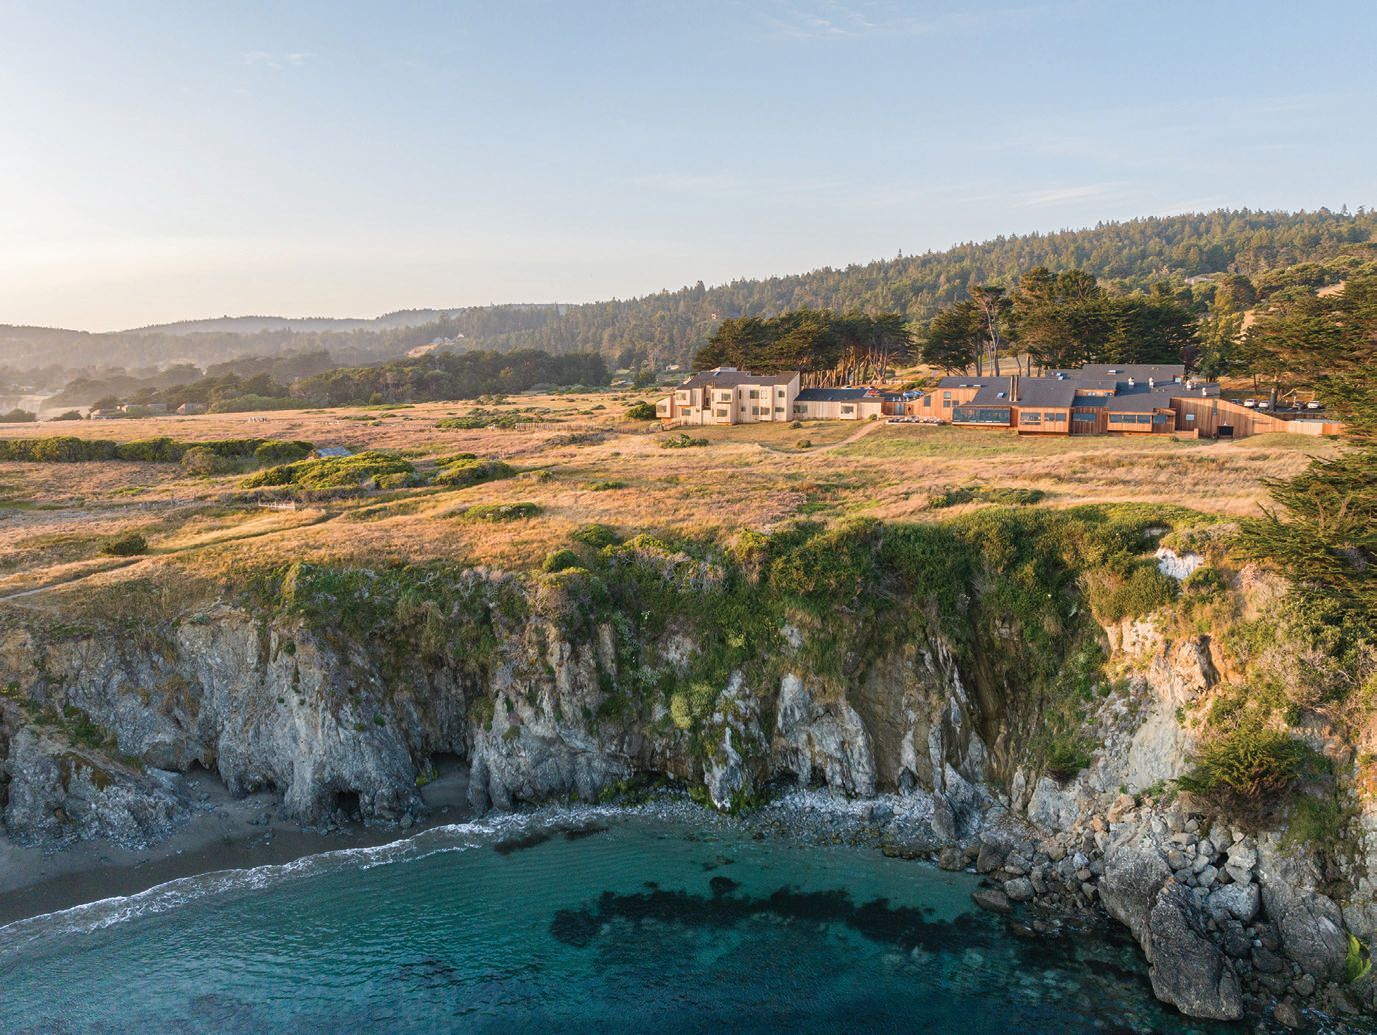 The setting for a getaway at Sea Ranch Lodge is among the most picturesque in North America. PHOTO BY ADAM POTTS